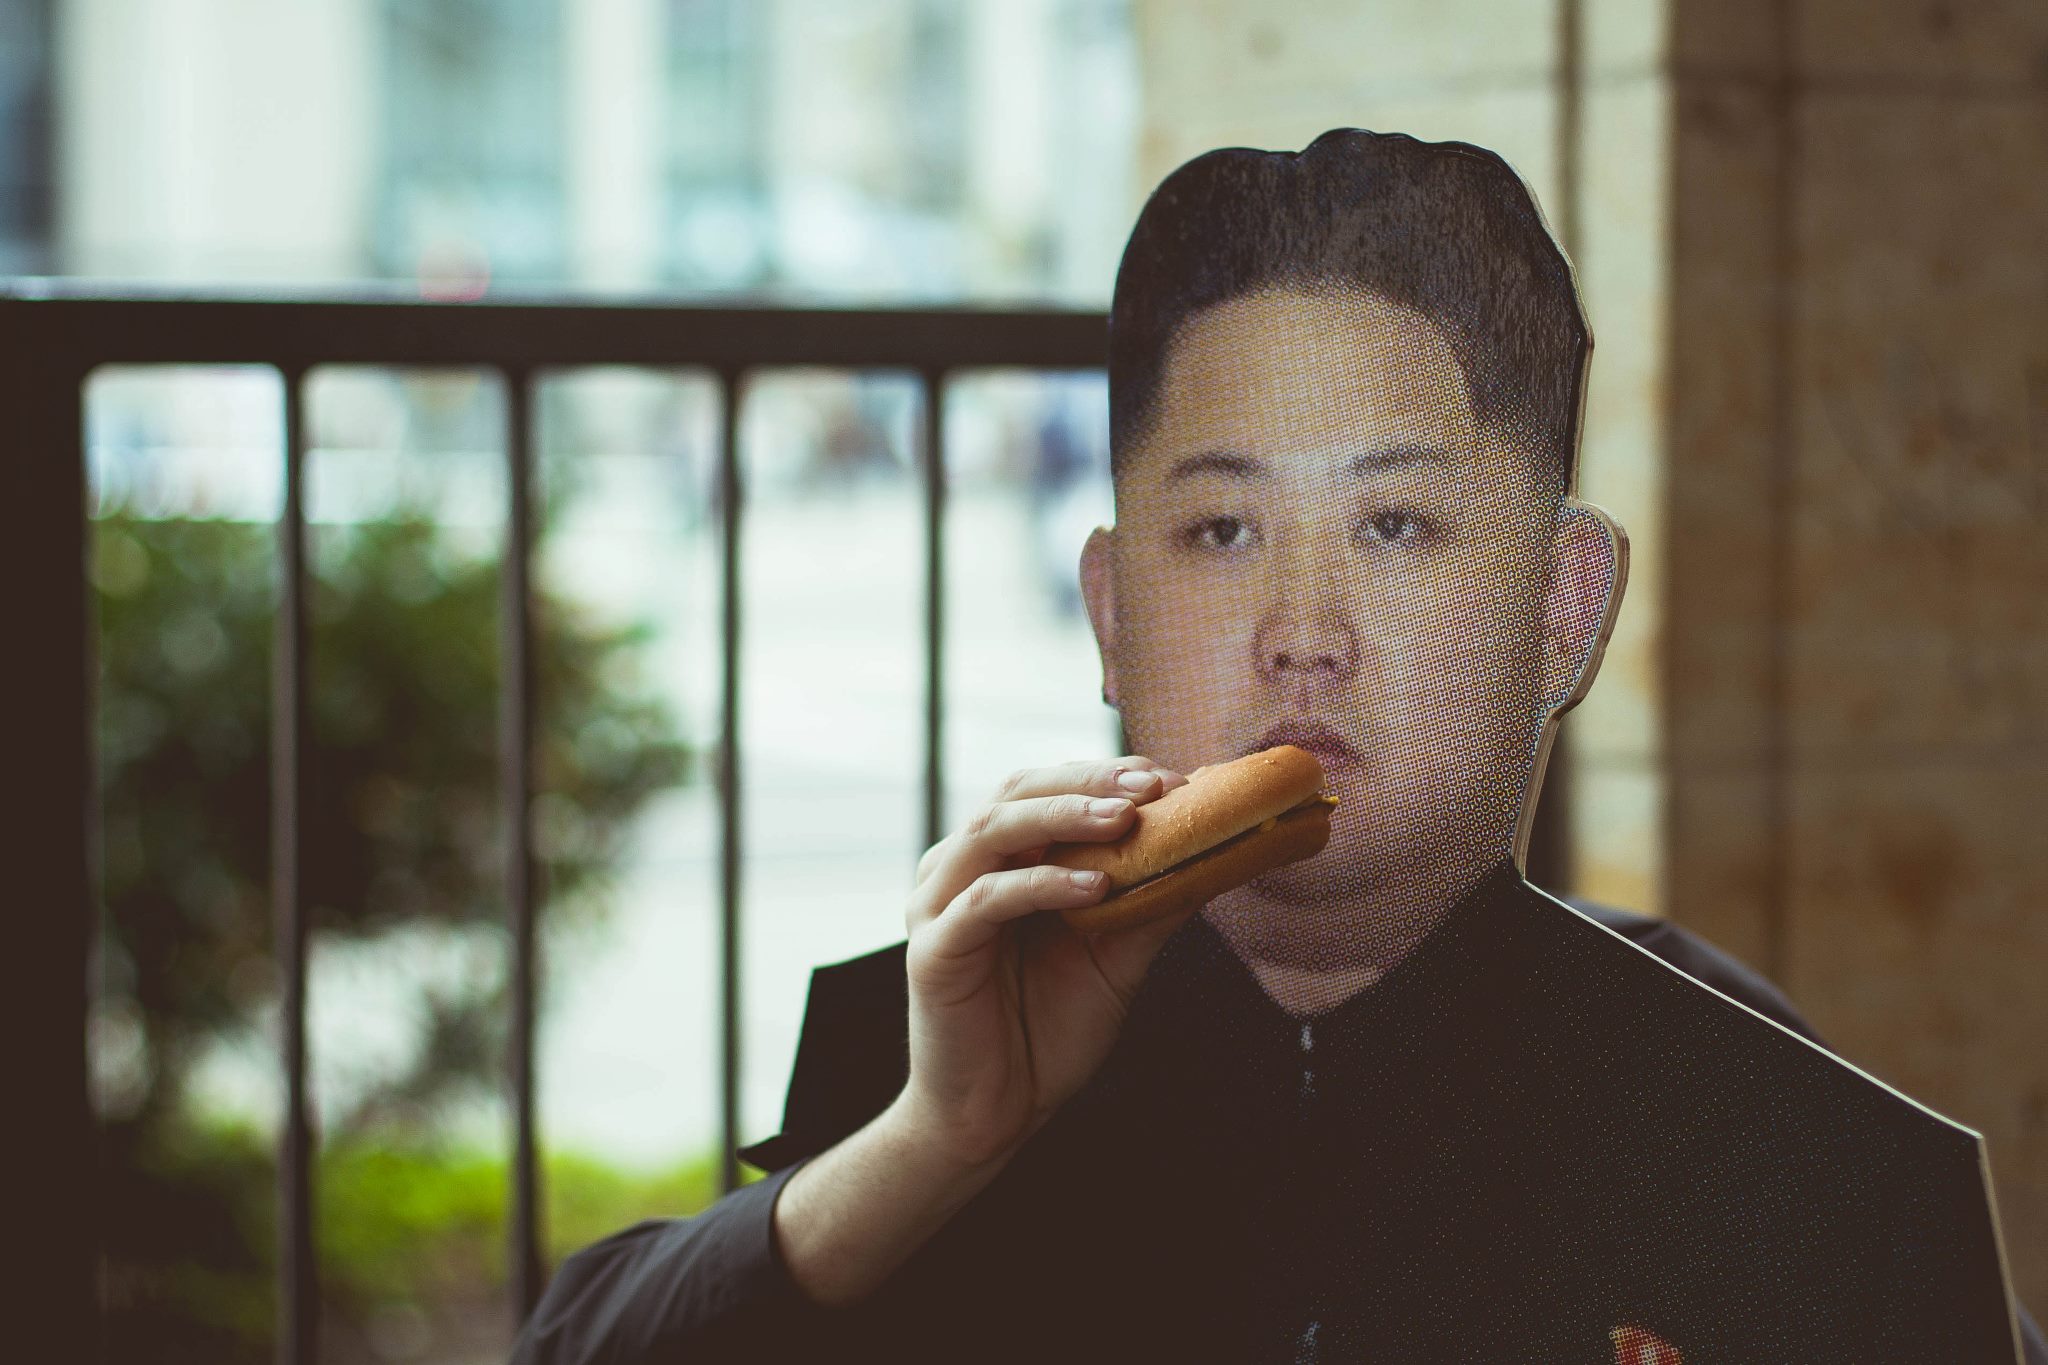 Will the real Kim Jong Un please stand up?